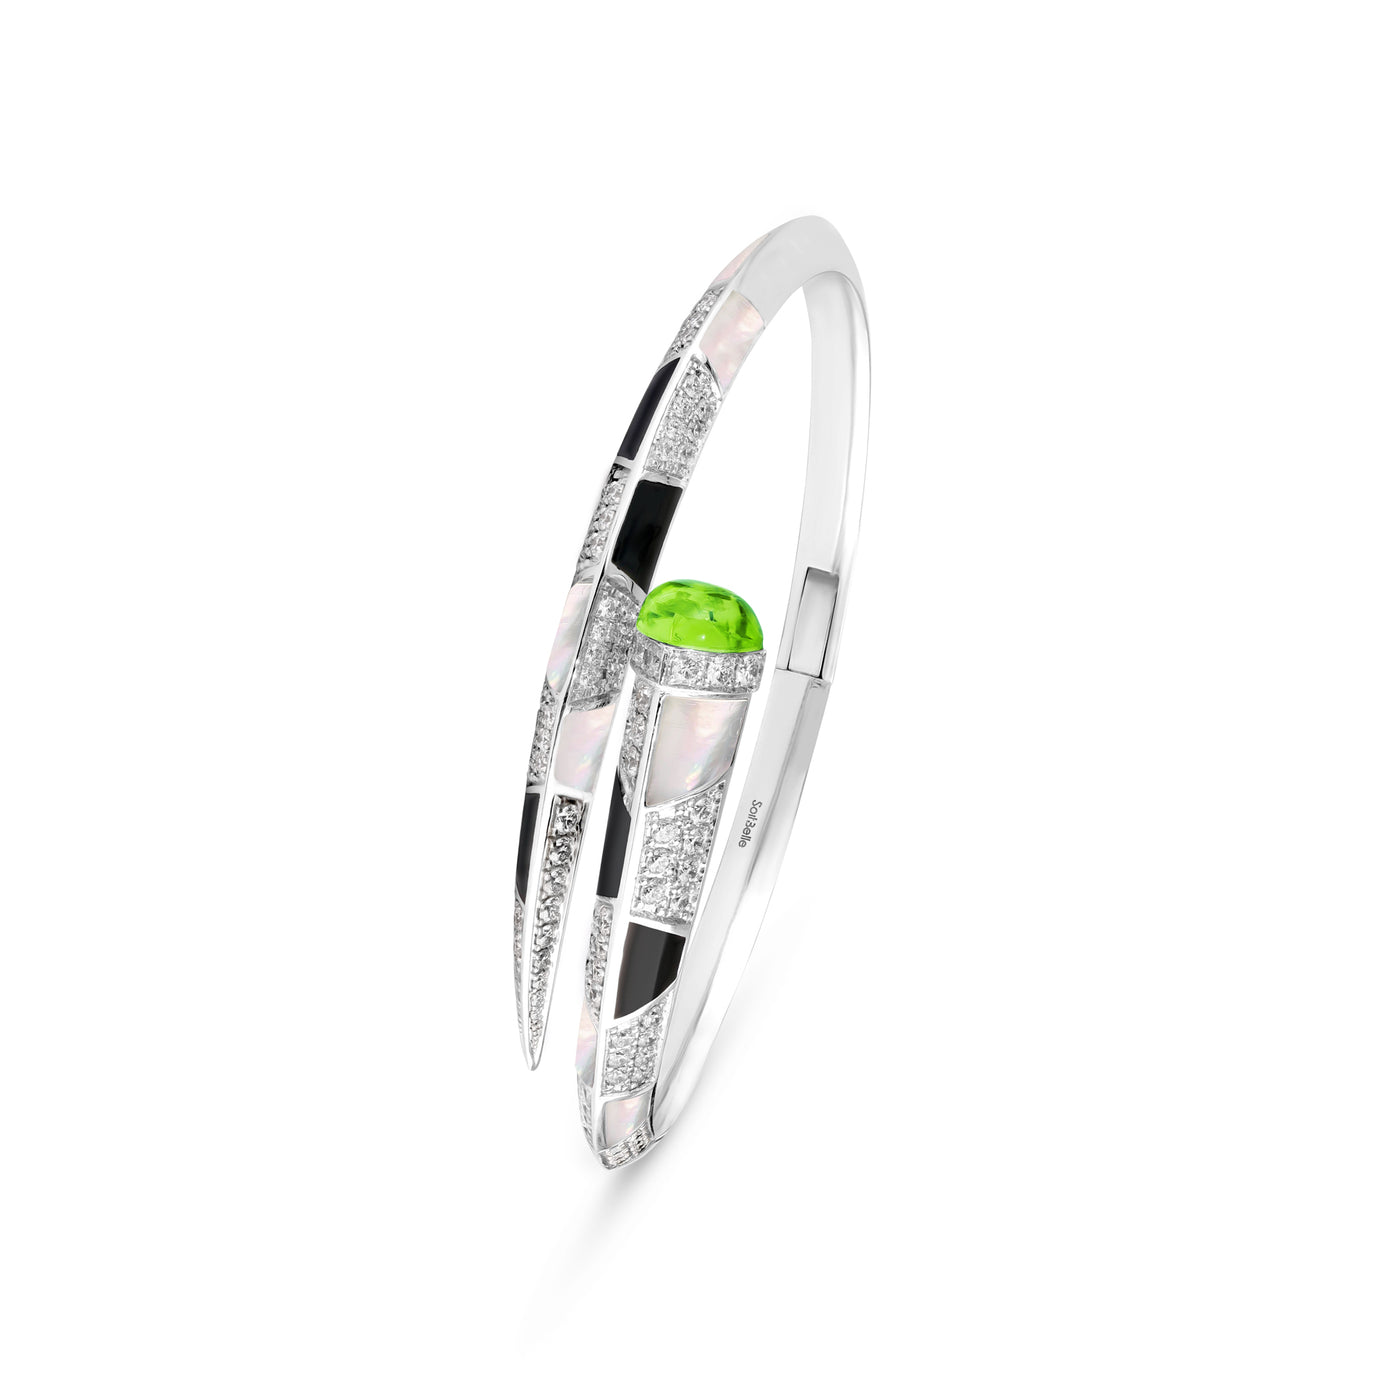 Soit Belle Signature White Gold Bracelet With Natural Peridot